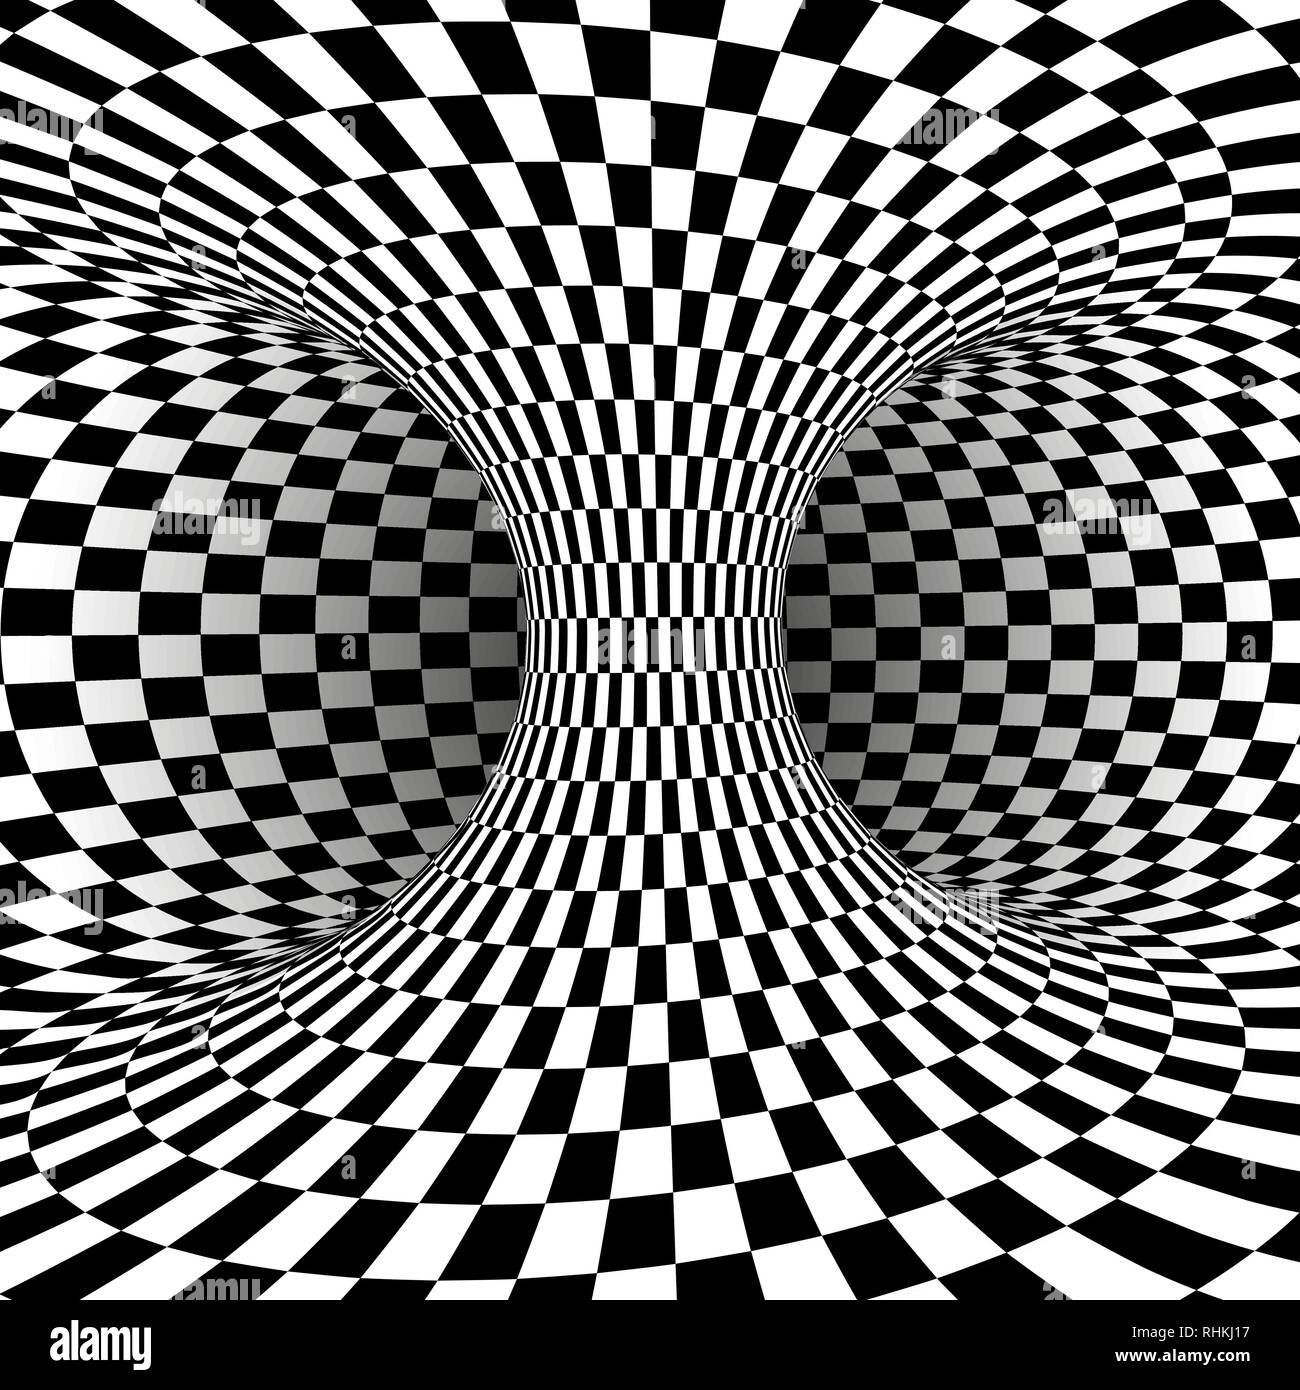 Black and white square optical illusion. Abstract illusion background. Vector illustration Stock Vector